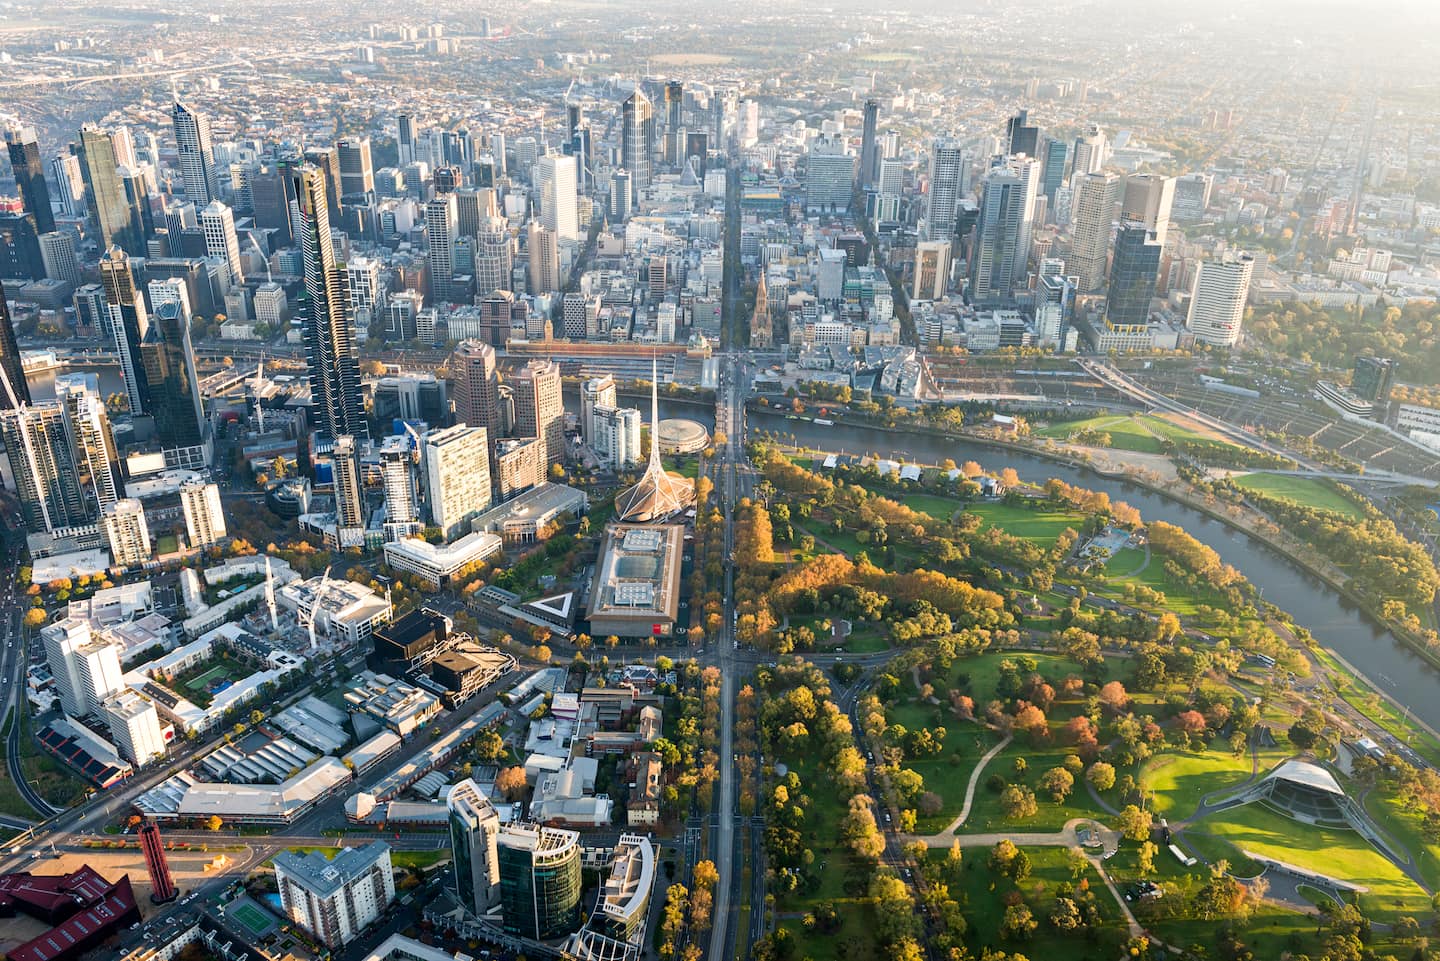 Aerial photo of Melbourne CBD showing the Yarra river to the right